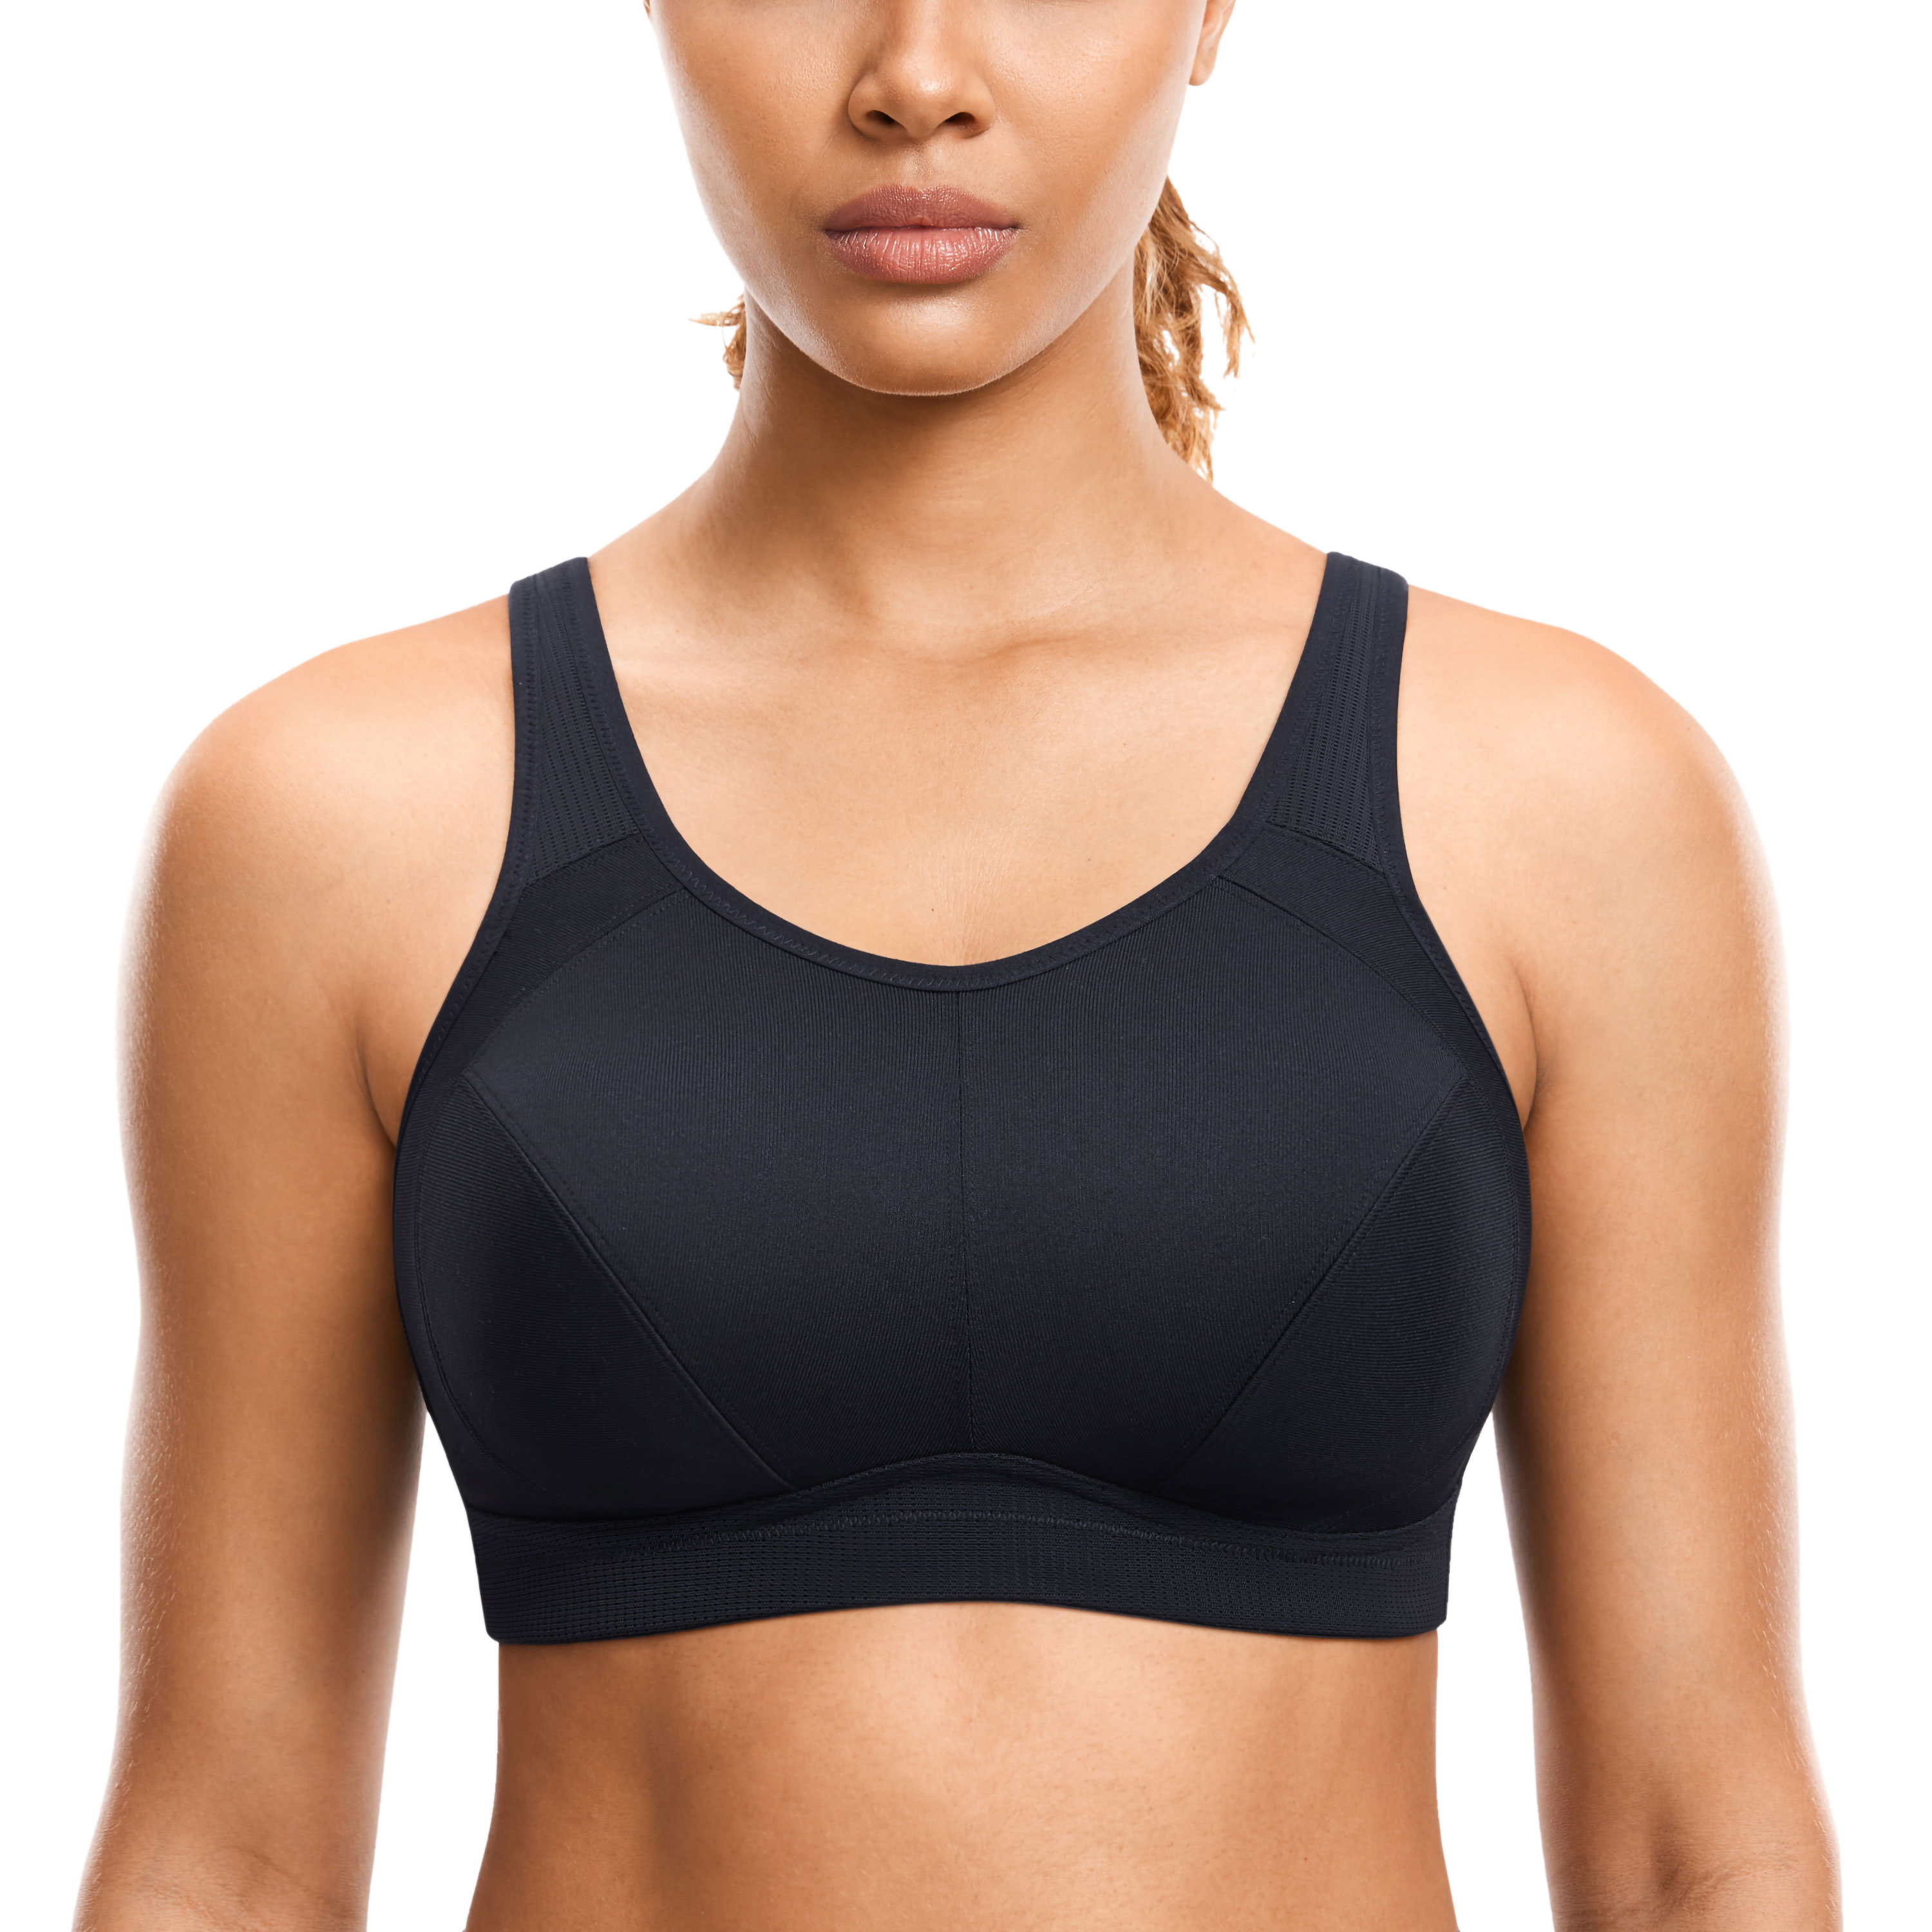 SYROKAN Wirefree Front Adjustable Sports Bras for Women High